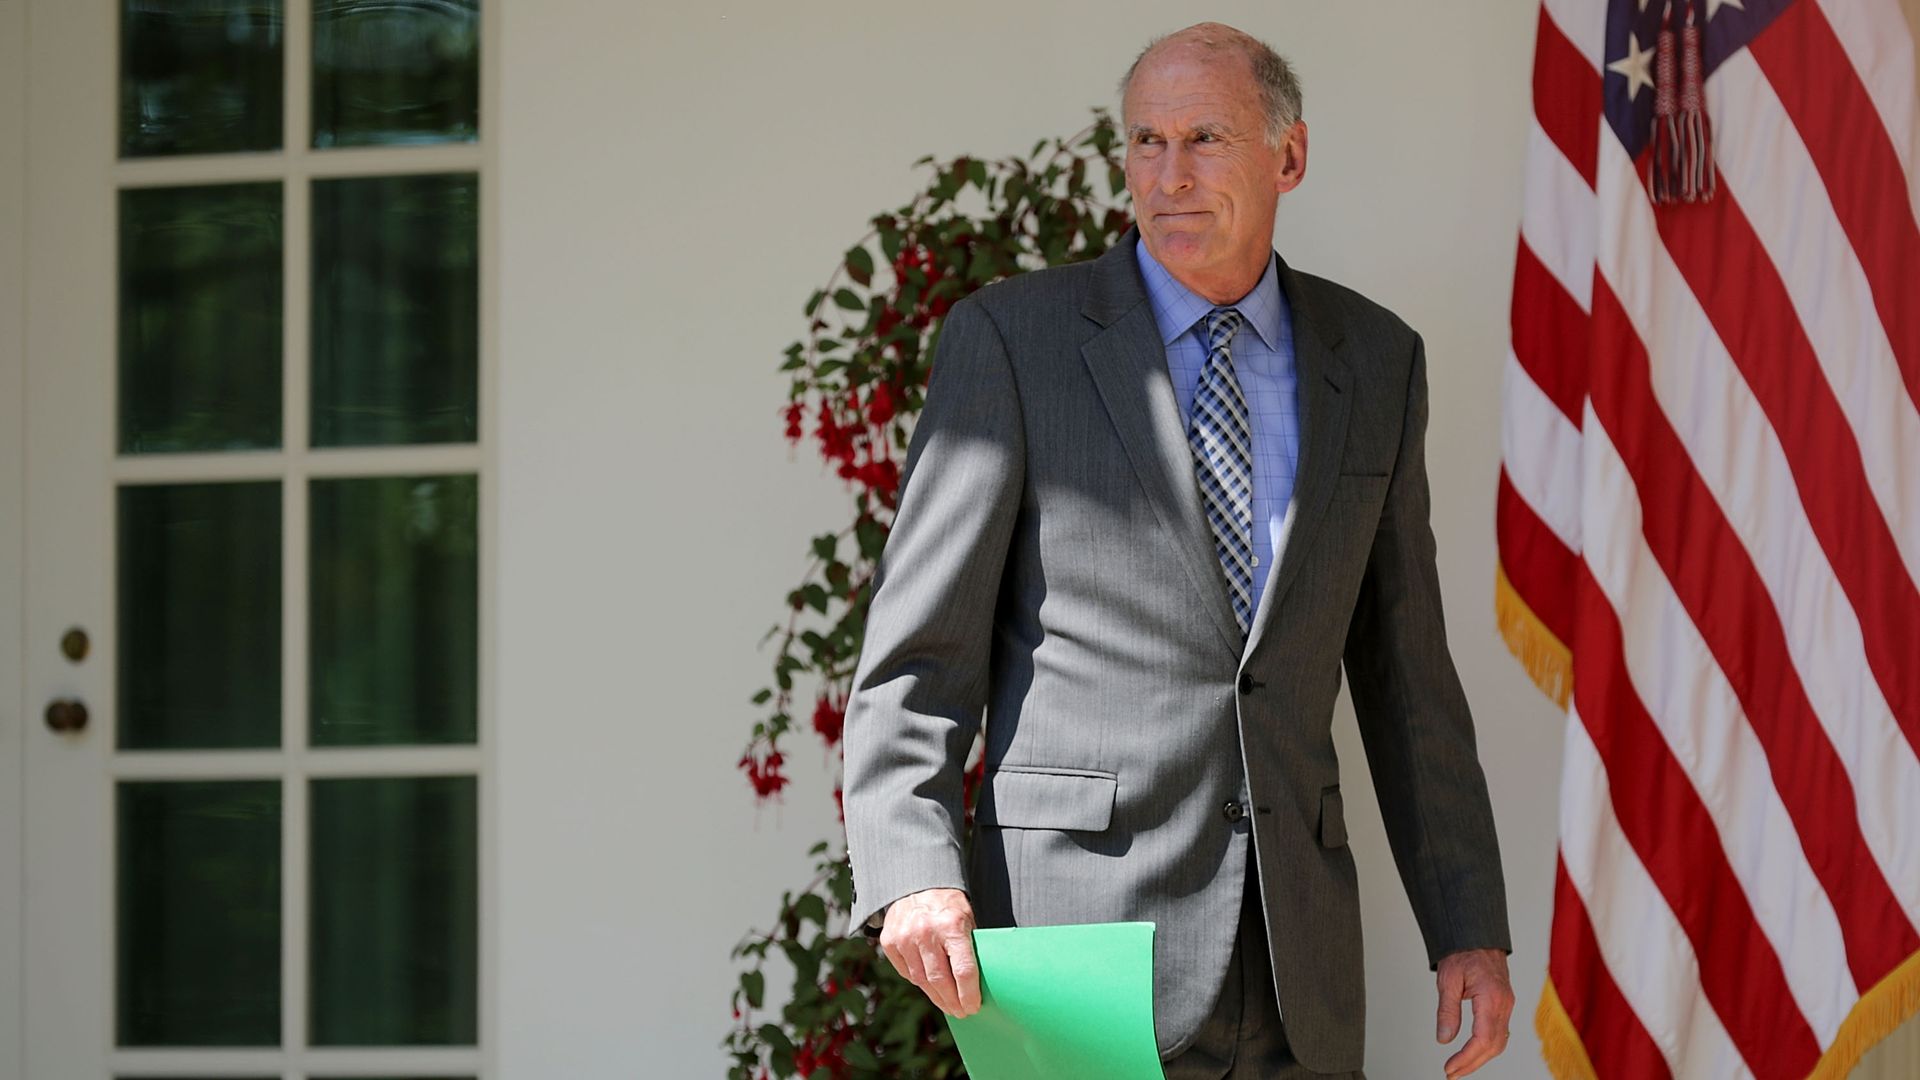 U.S. Director of National Intelligence Dan Coats walks along the Rose Garden Colonnade before an event to mark the National Day of Prayer at the White House May 3